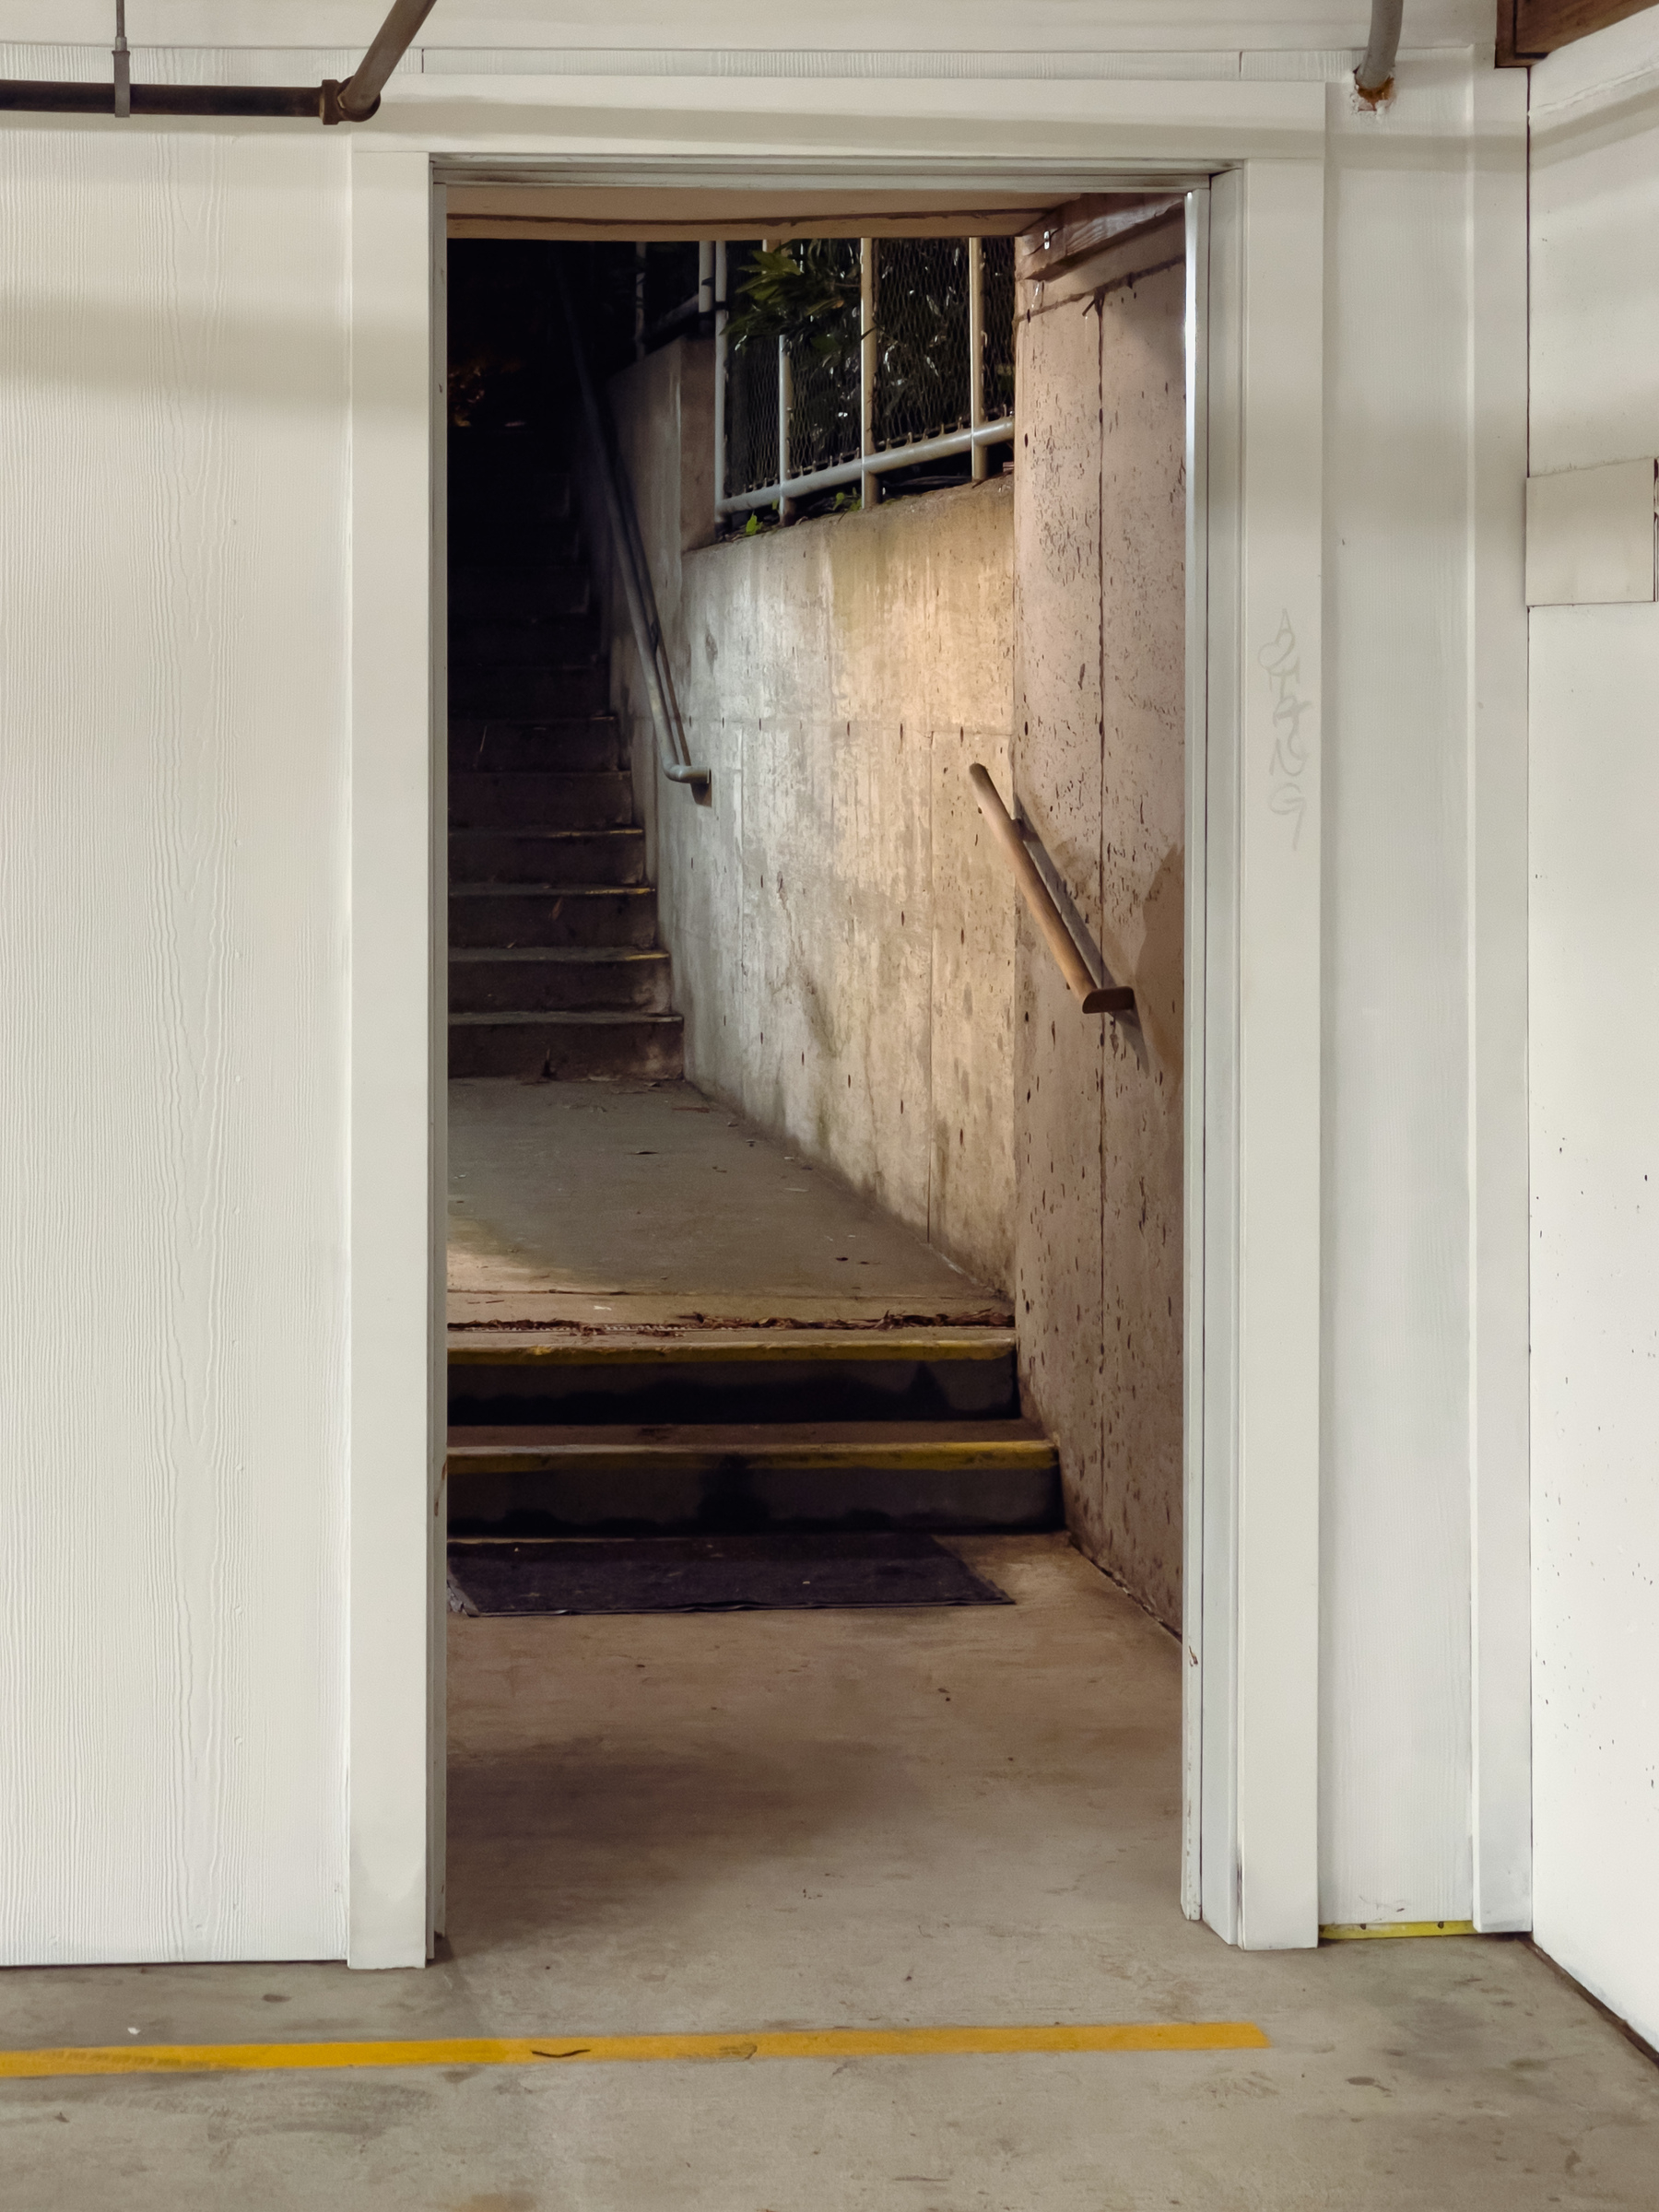 Descending concrete stairs through a doorway in a white wall.